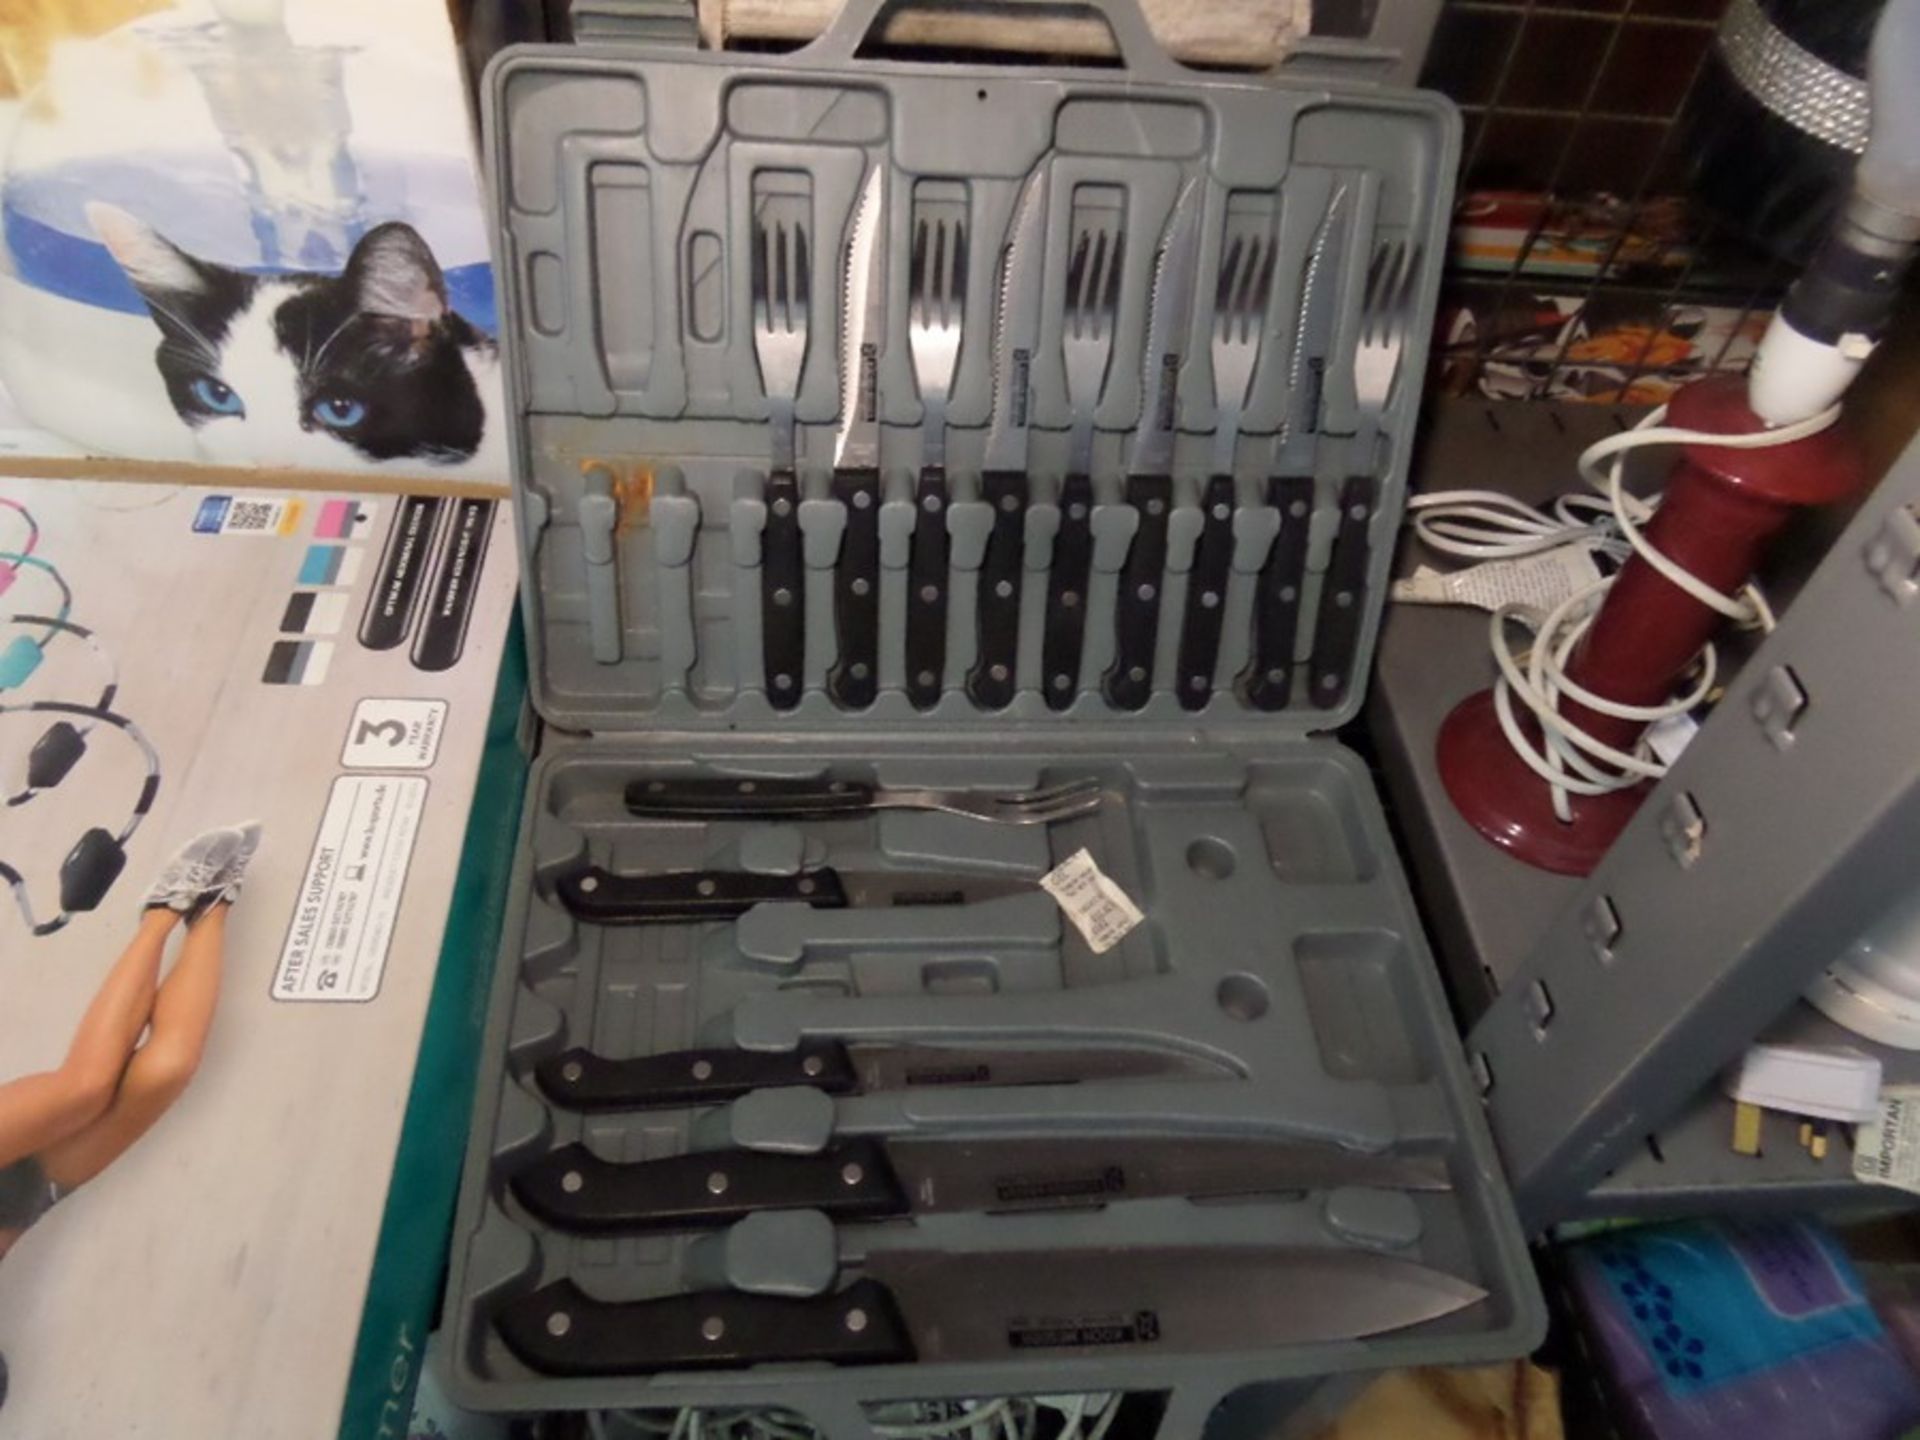 CASE OF STEAK CUTLERY AND KITCHEN KNIVES